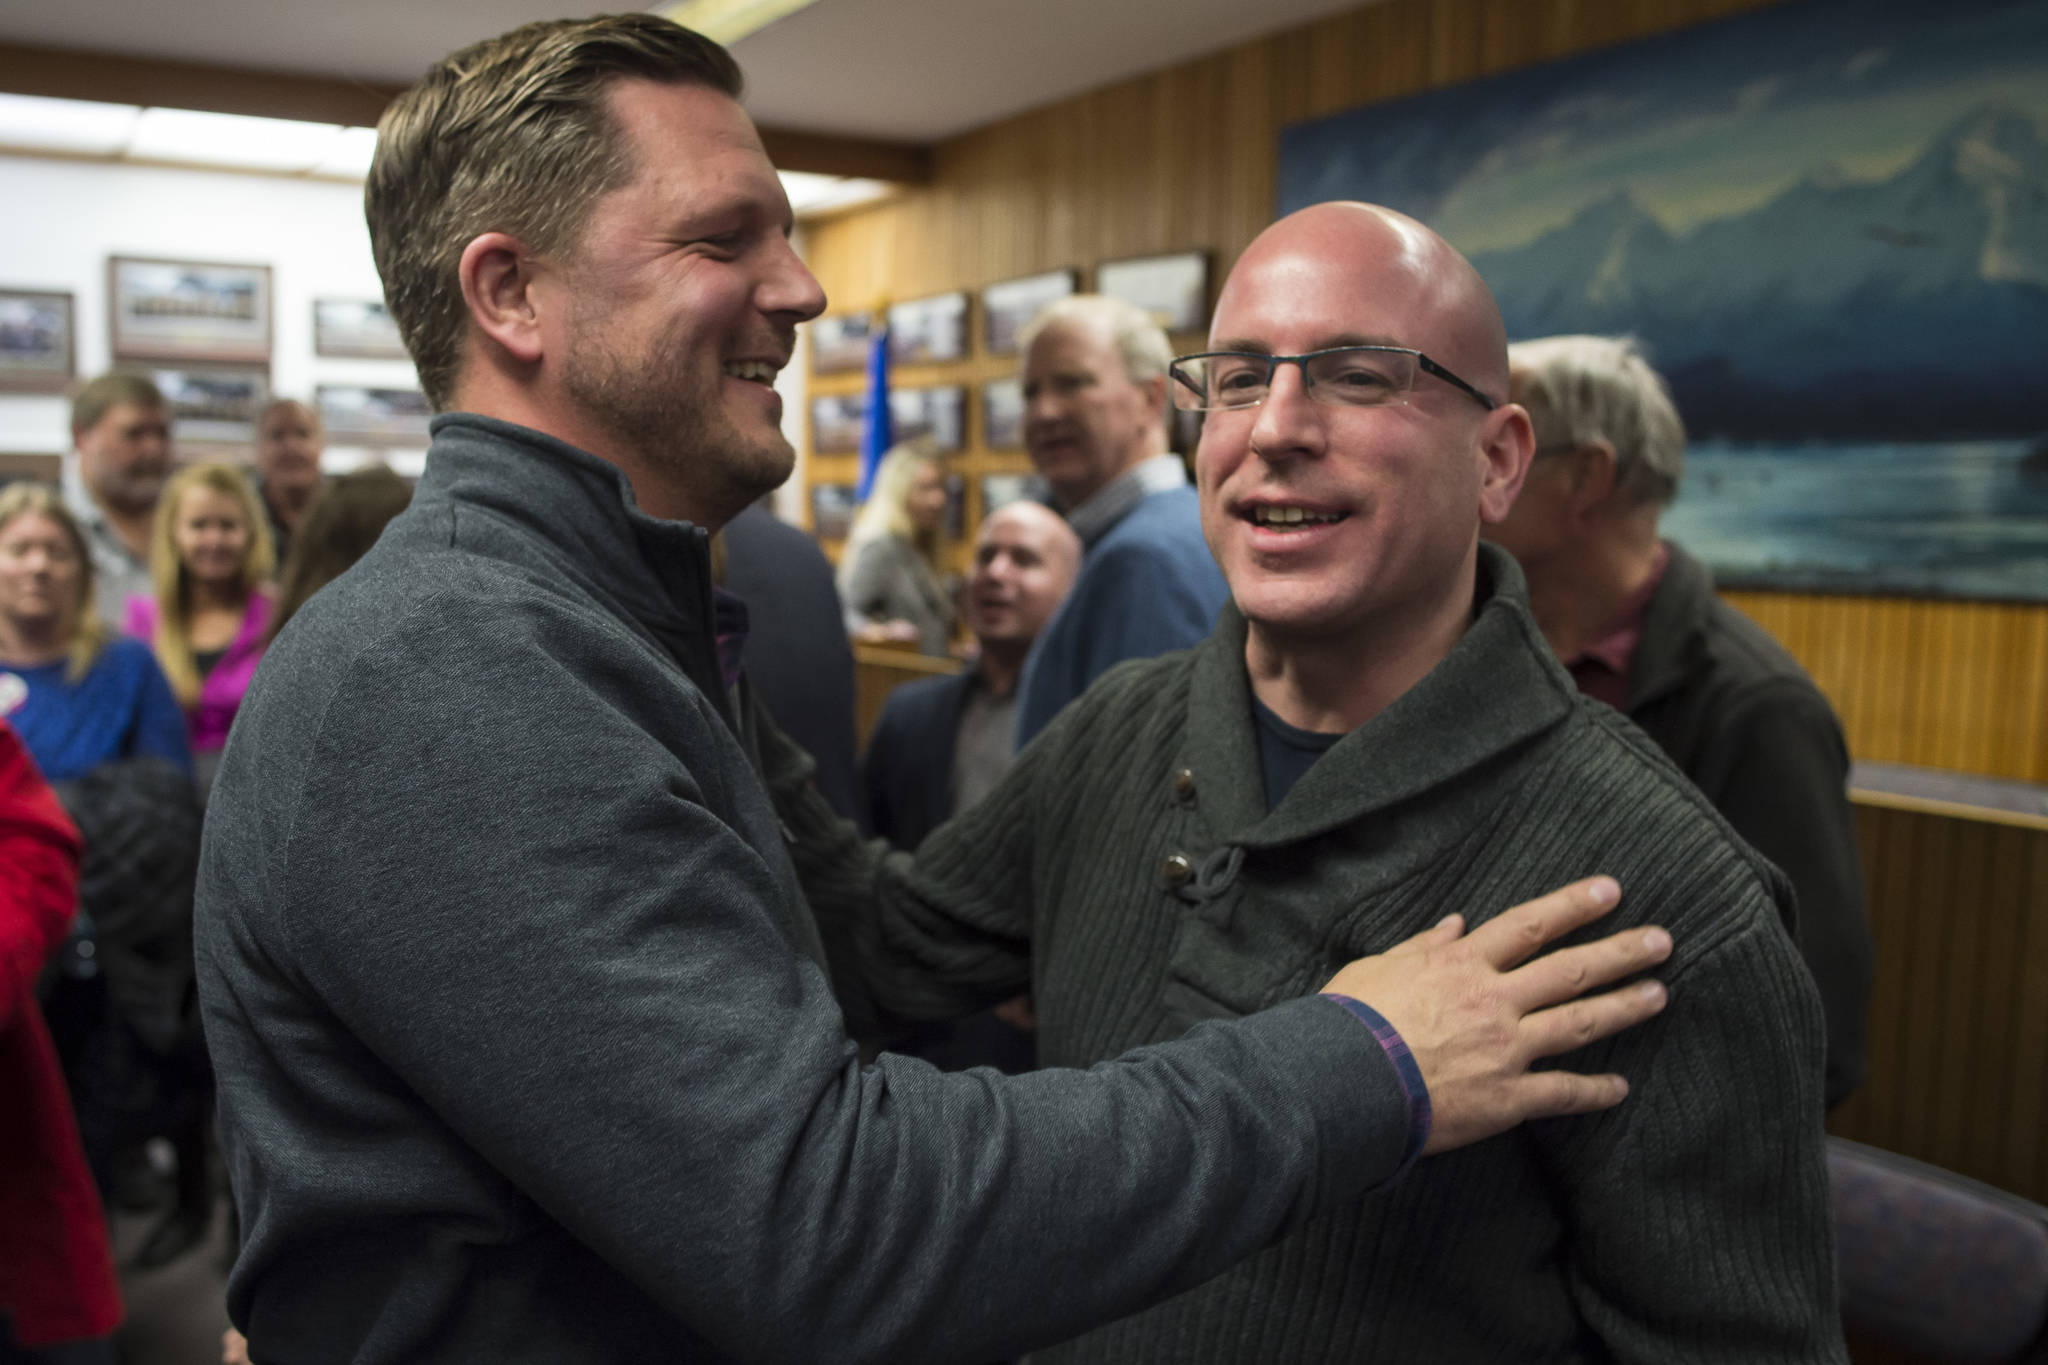 Assembly District 2 candidates Garrett Schoenberger, left, and Wade Bryson greet each other during Election night in the Assembly chambers on Tuesday, Oct. 2, 2018. (Michael Penn | Juneau Empire)